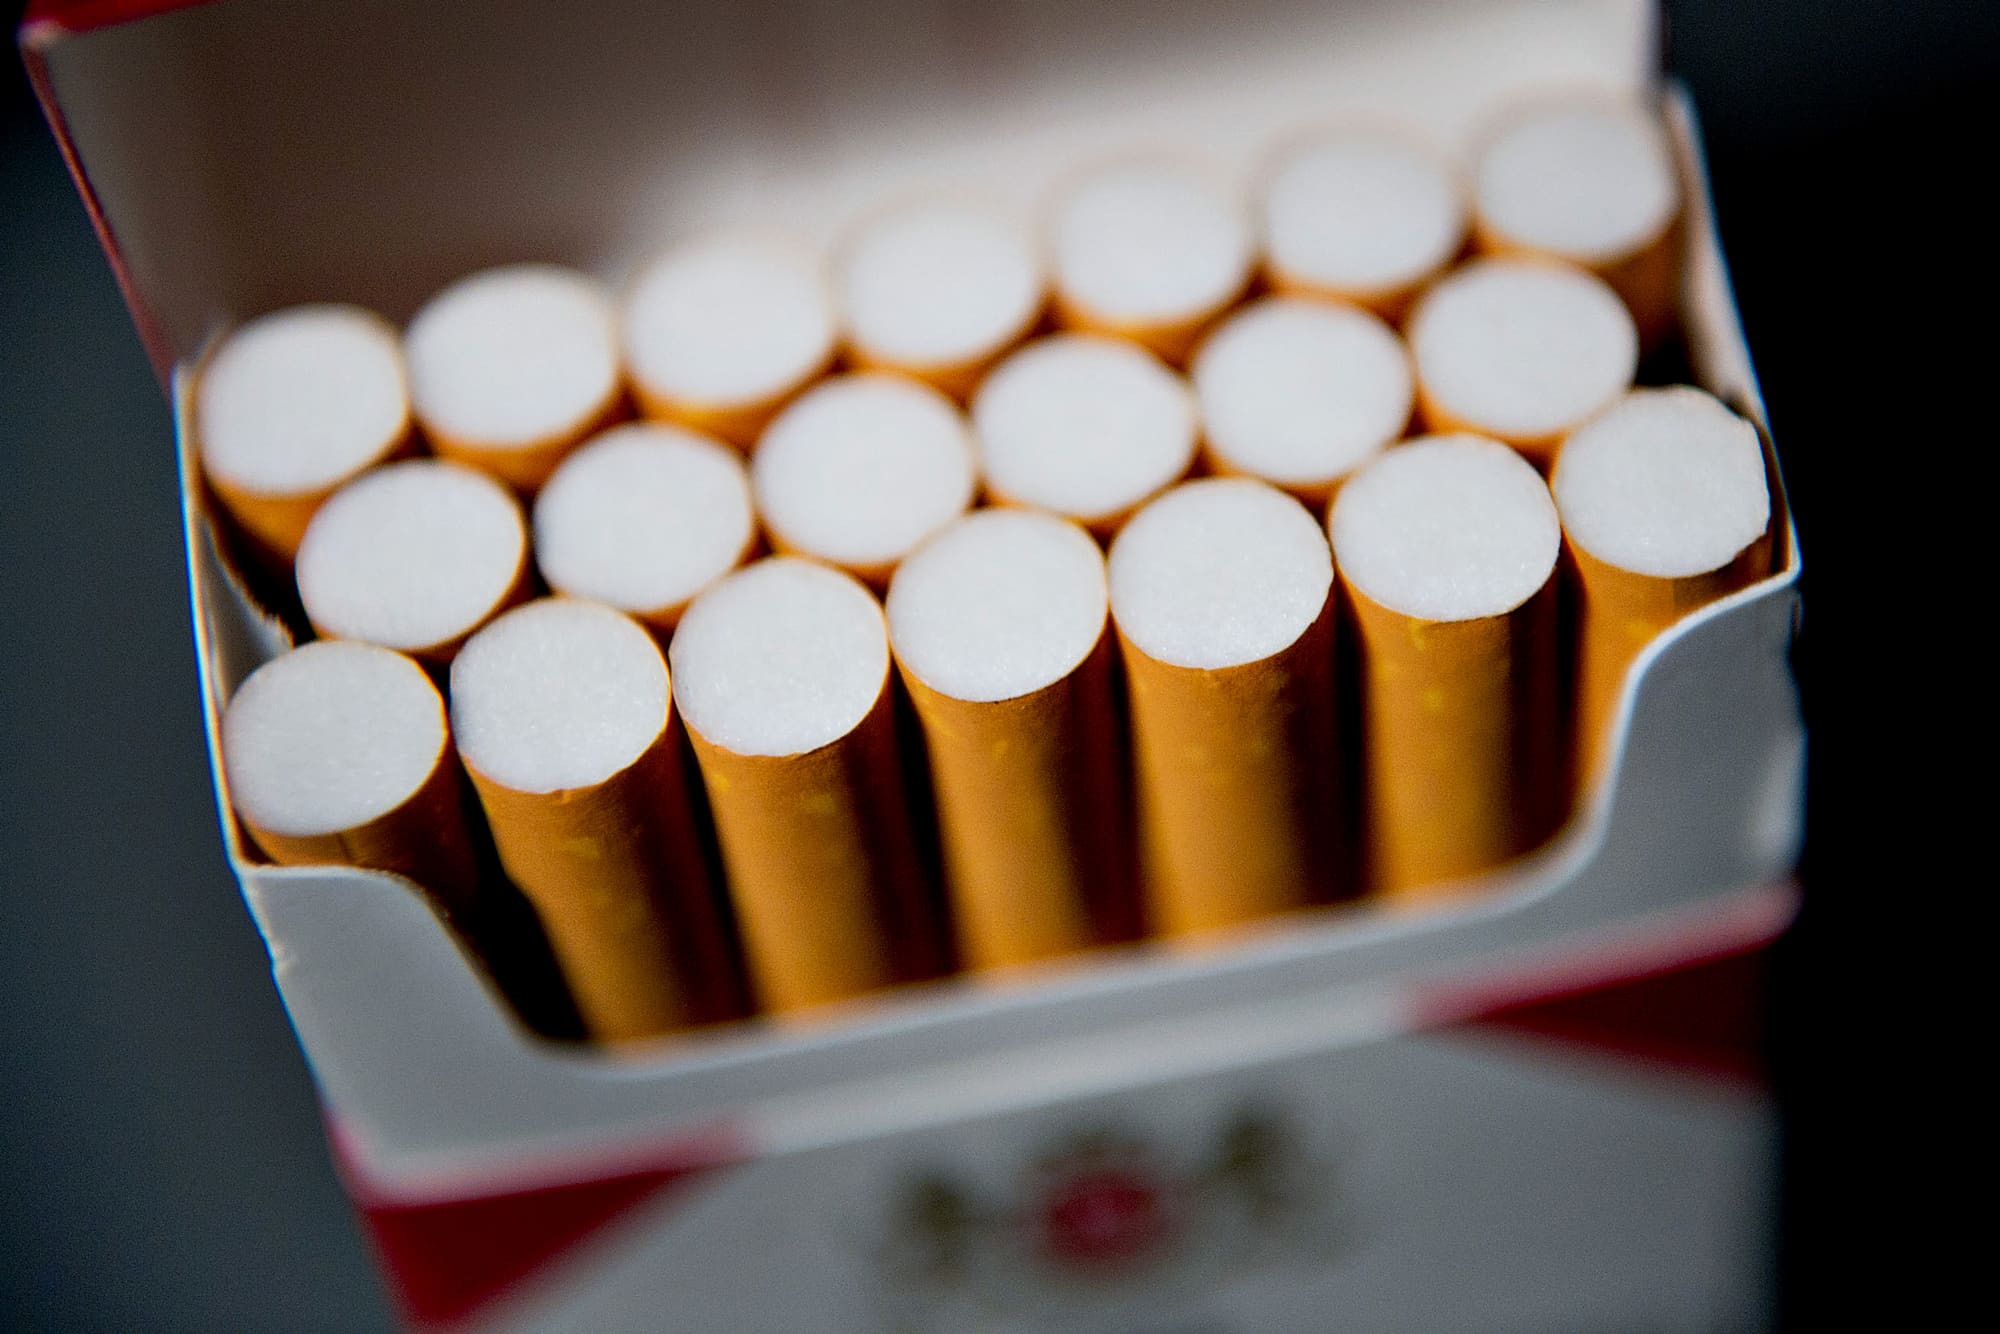 Altria stated cigarette business shipments flattened in 2020